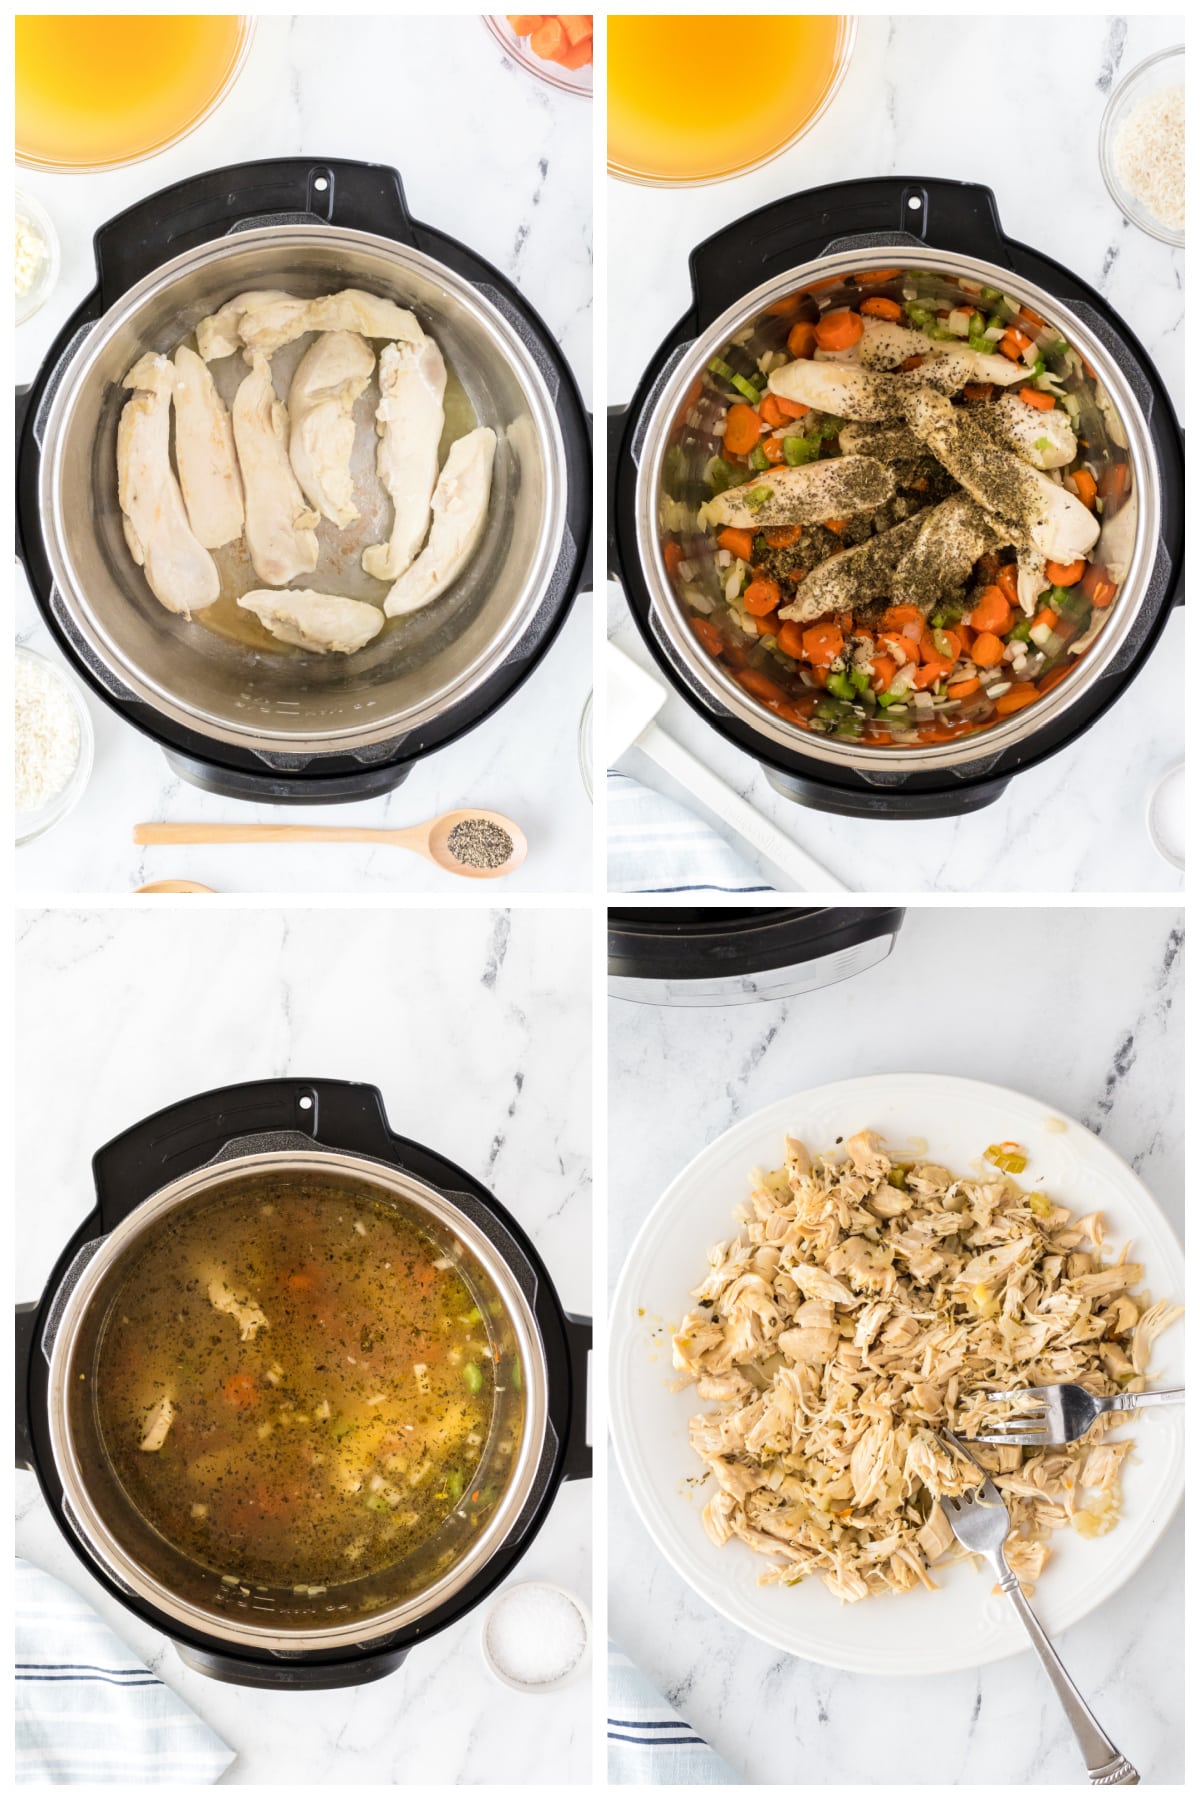 A COLLAGE OF FOUR IMAGES SHOWING HOW TO MAKE THE RECIPE.